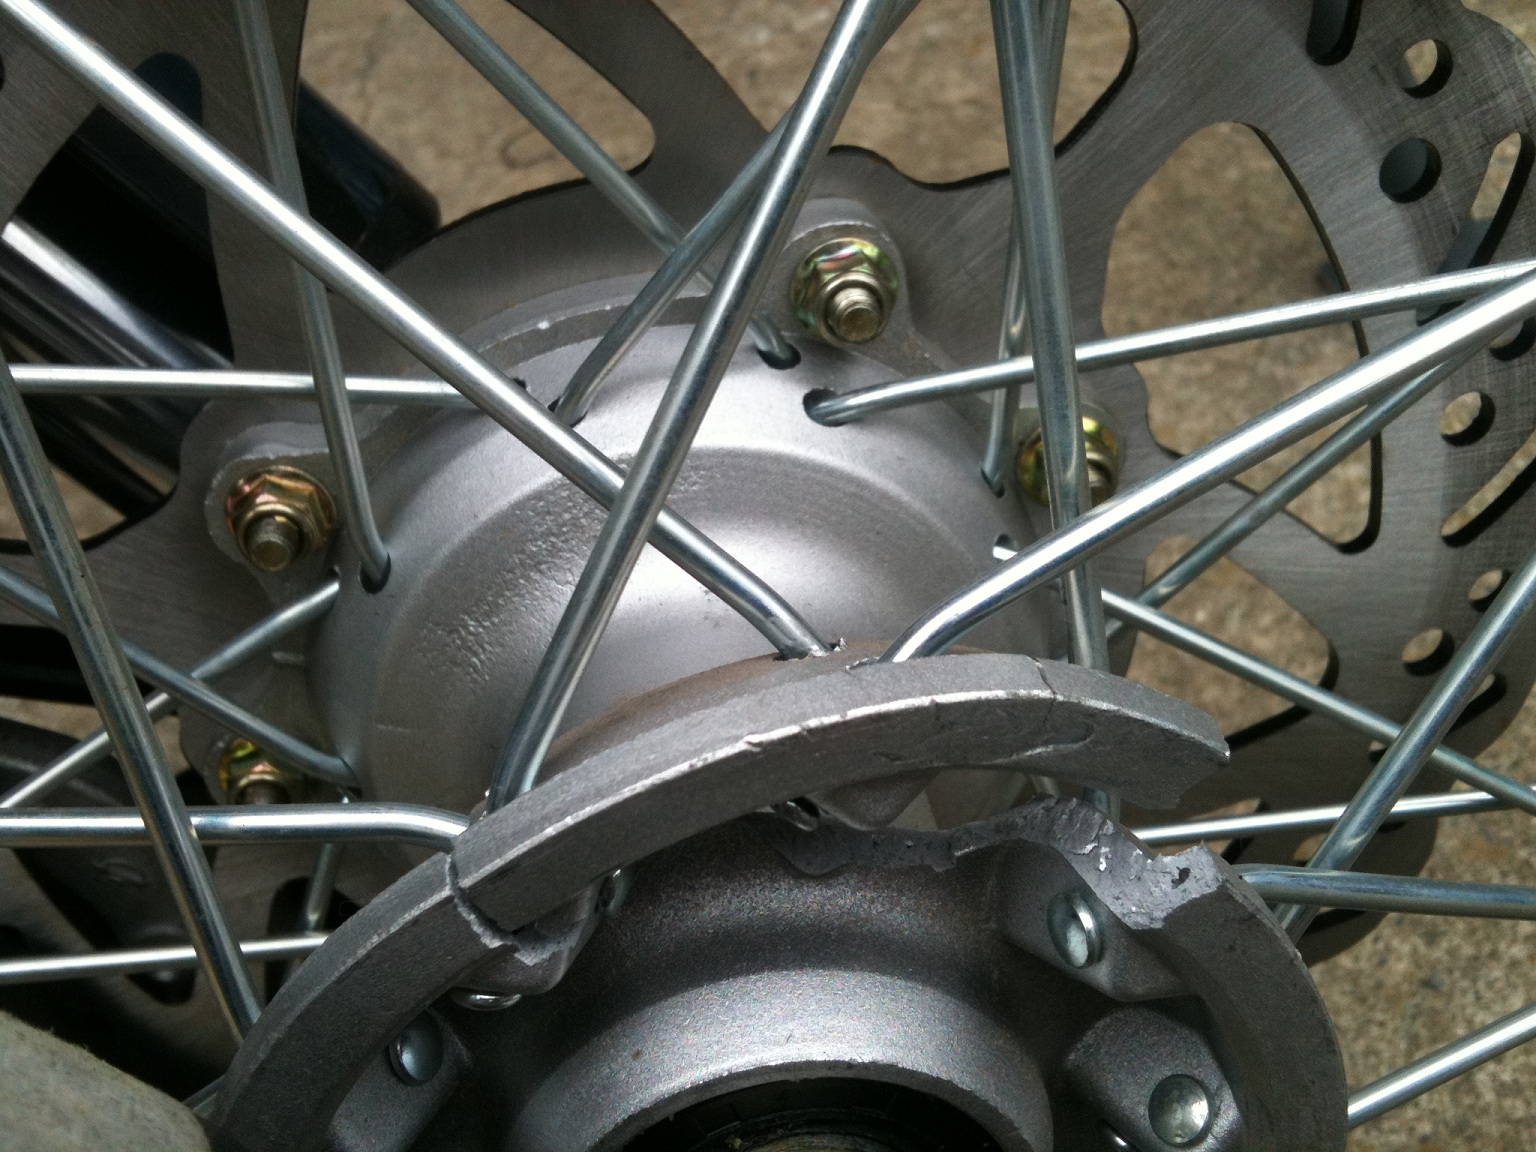 Brand new front wheel from PowerSportsMax